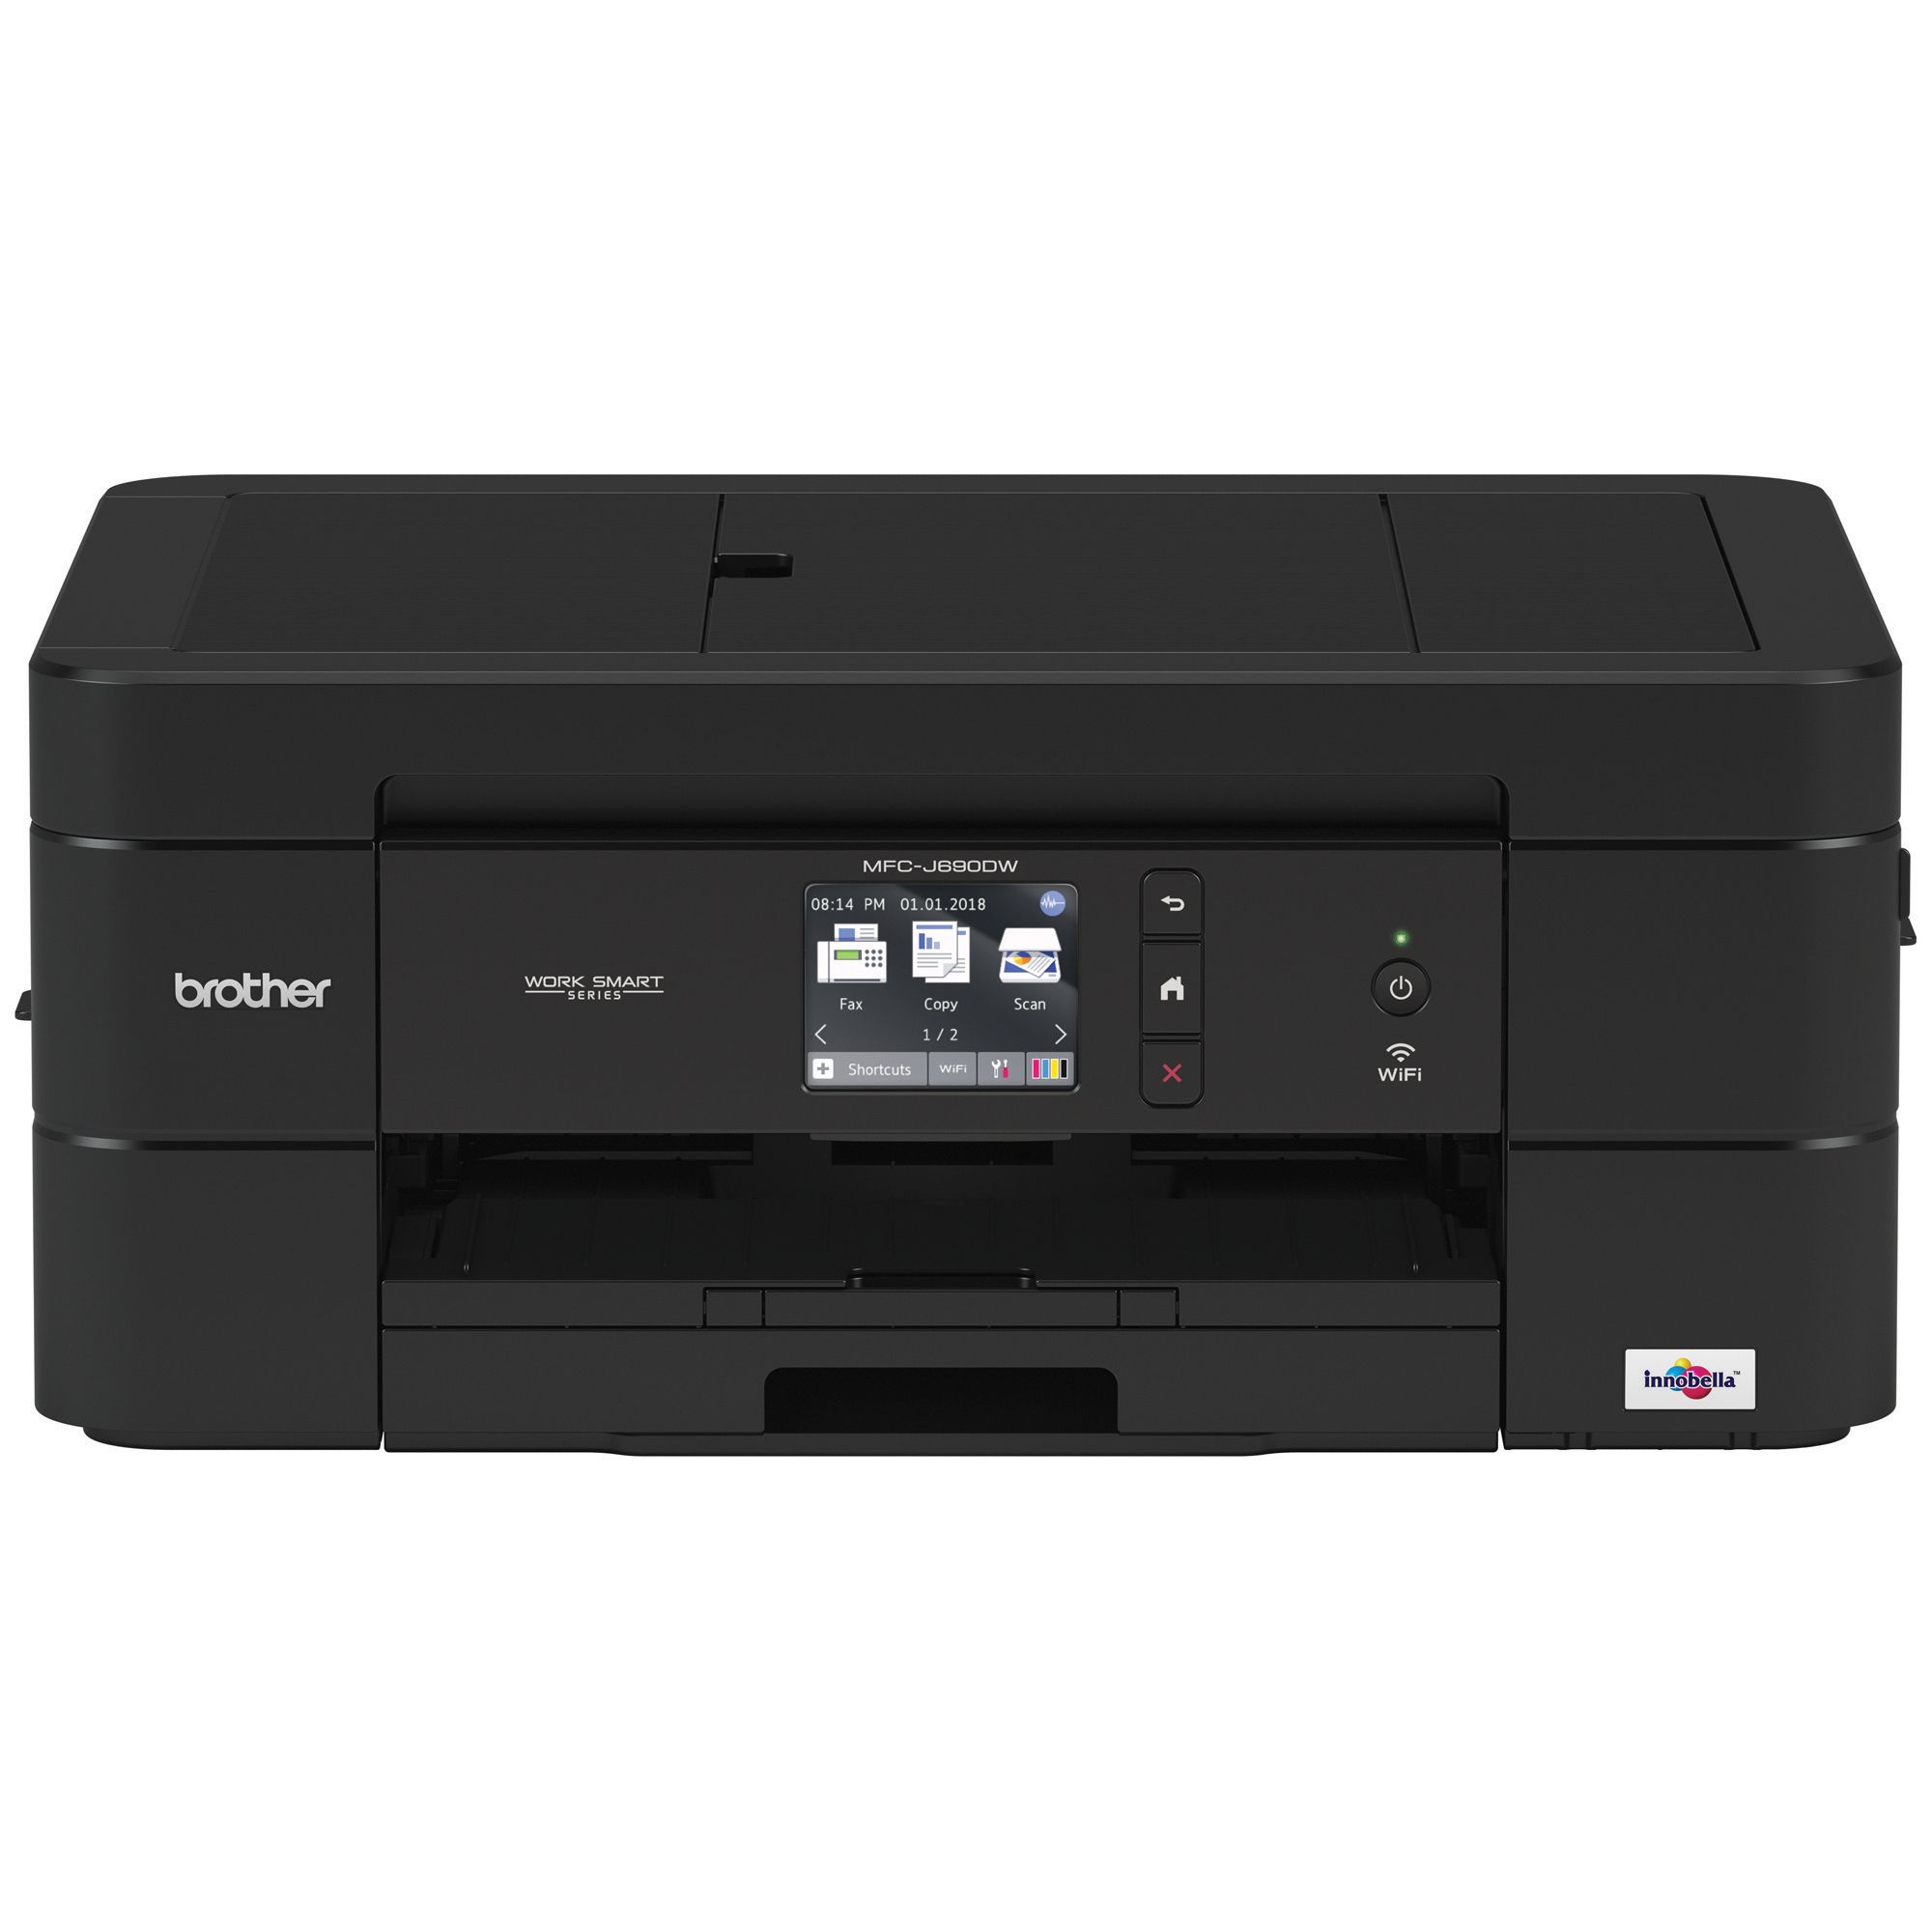 Brother MFC J895DW Wireless Color Inkjet All In One Printer